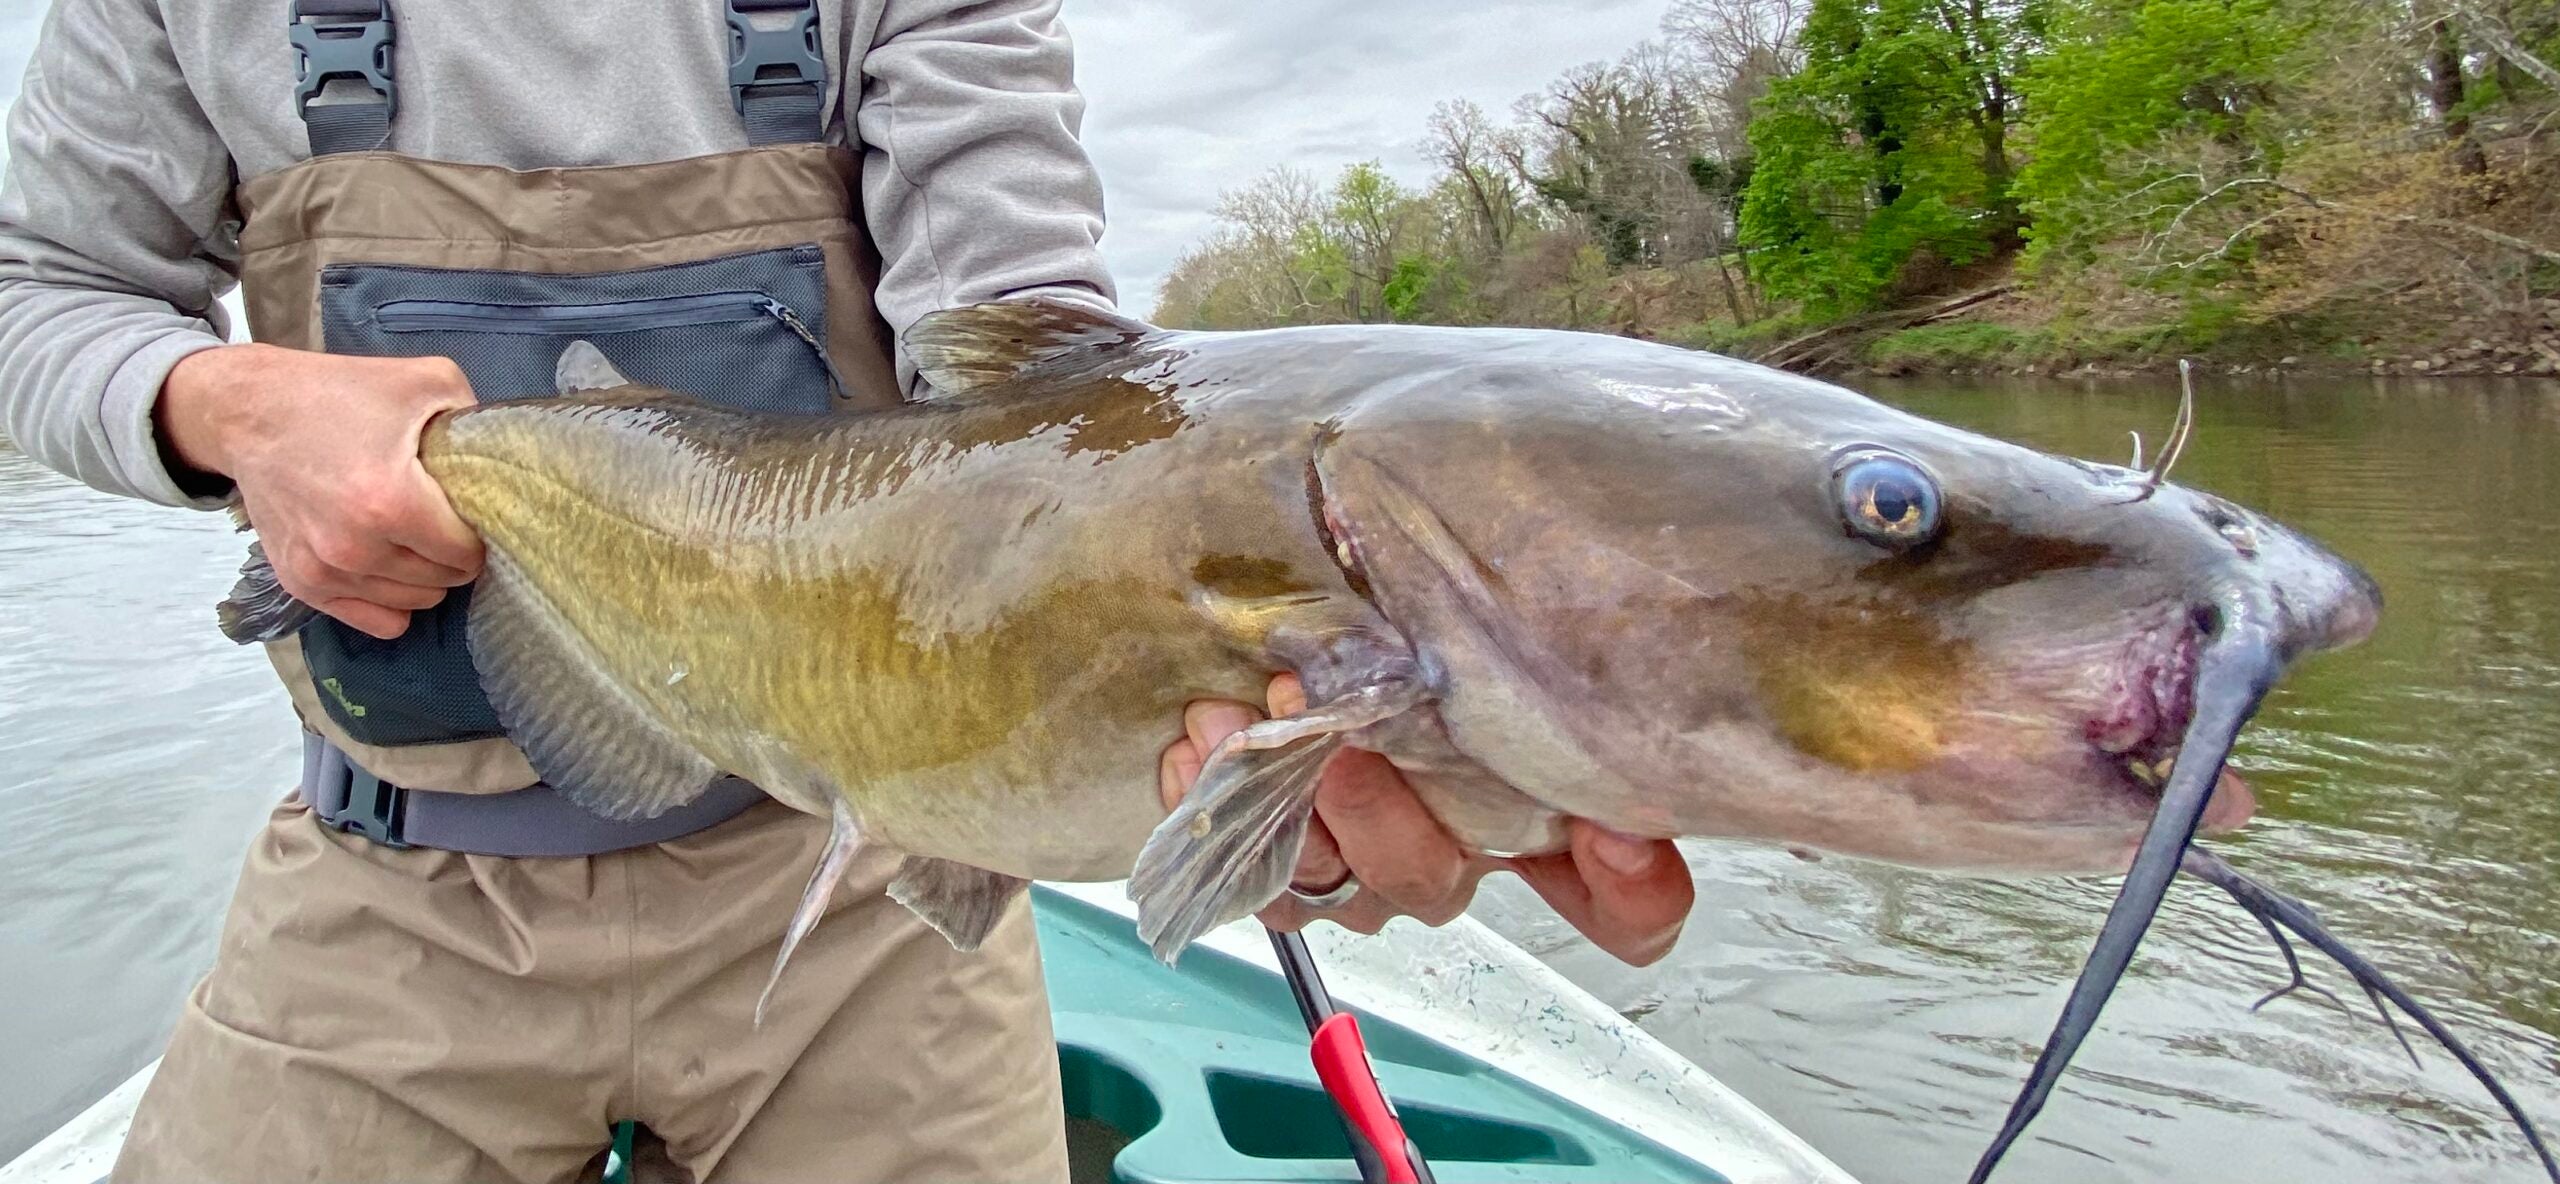 Catching BIG Catfish in TINY Boat - tips and tactics to catch more catfish  